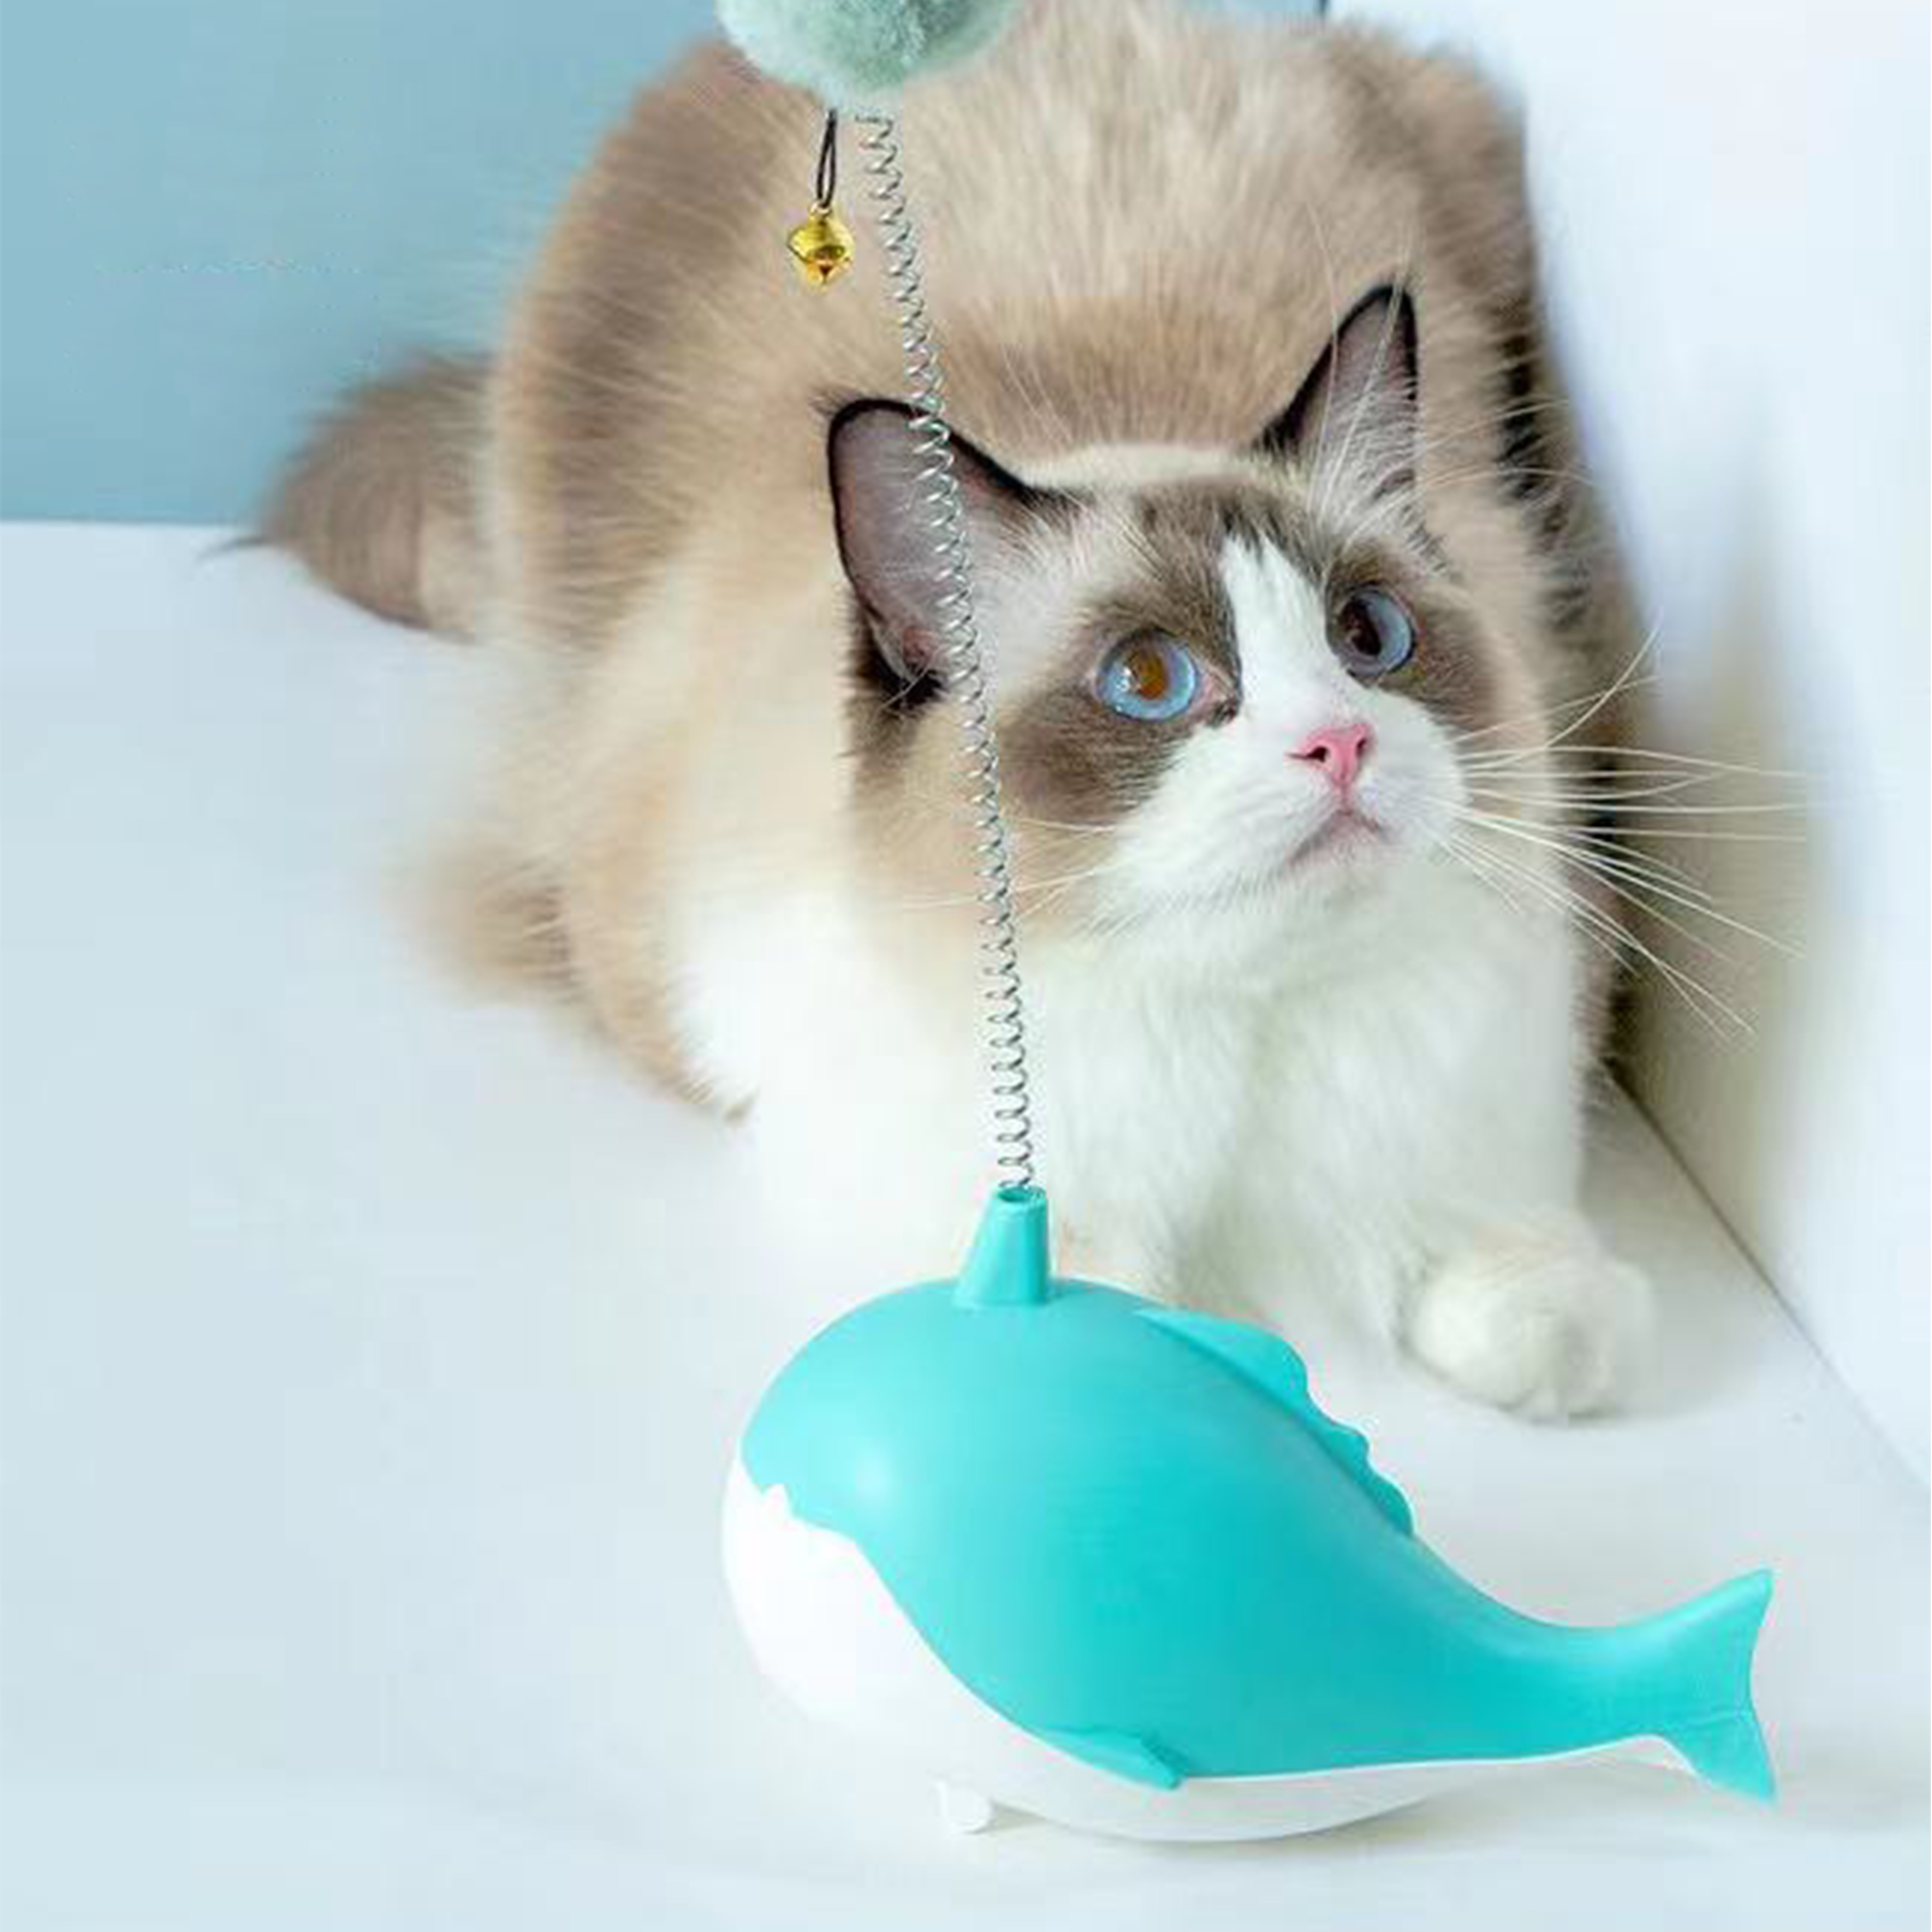 Shinee pet cat fish toy factory wholesale manufacturer Featured Image